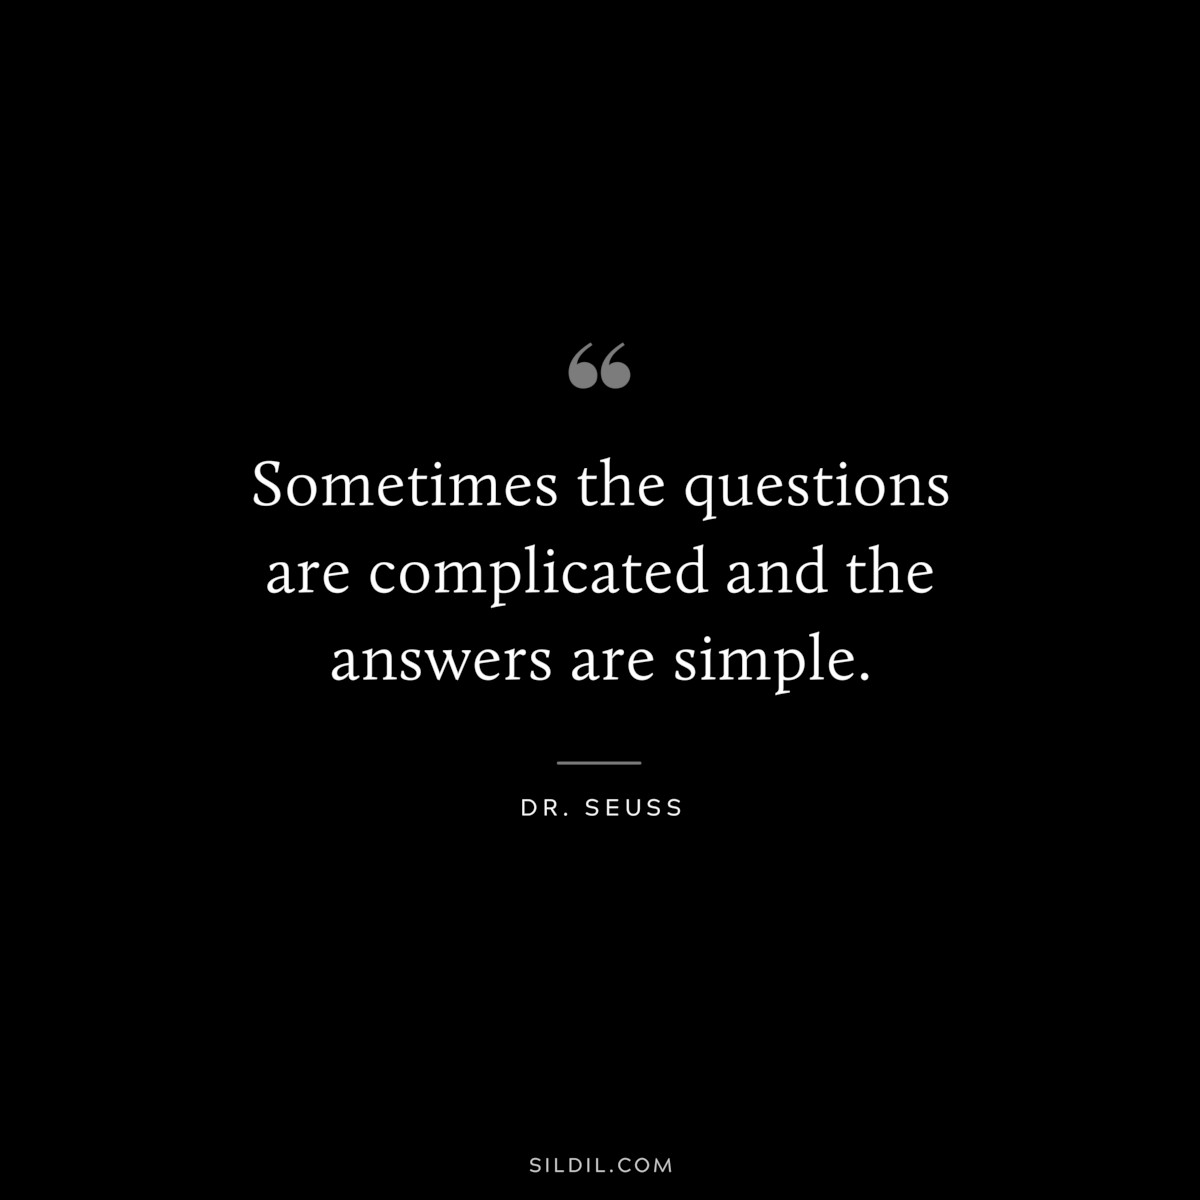 Sometimes the questions are complicated and the answers are simple. ― Dr. Seuss